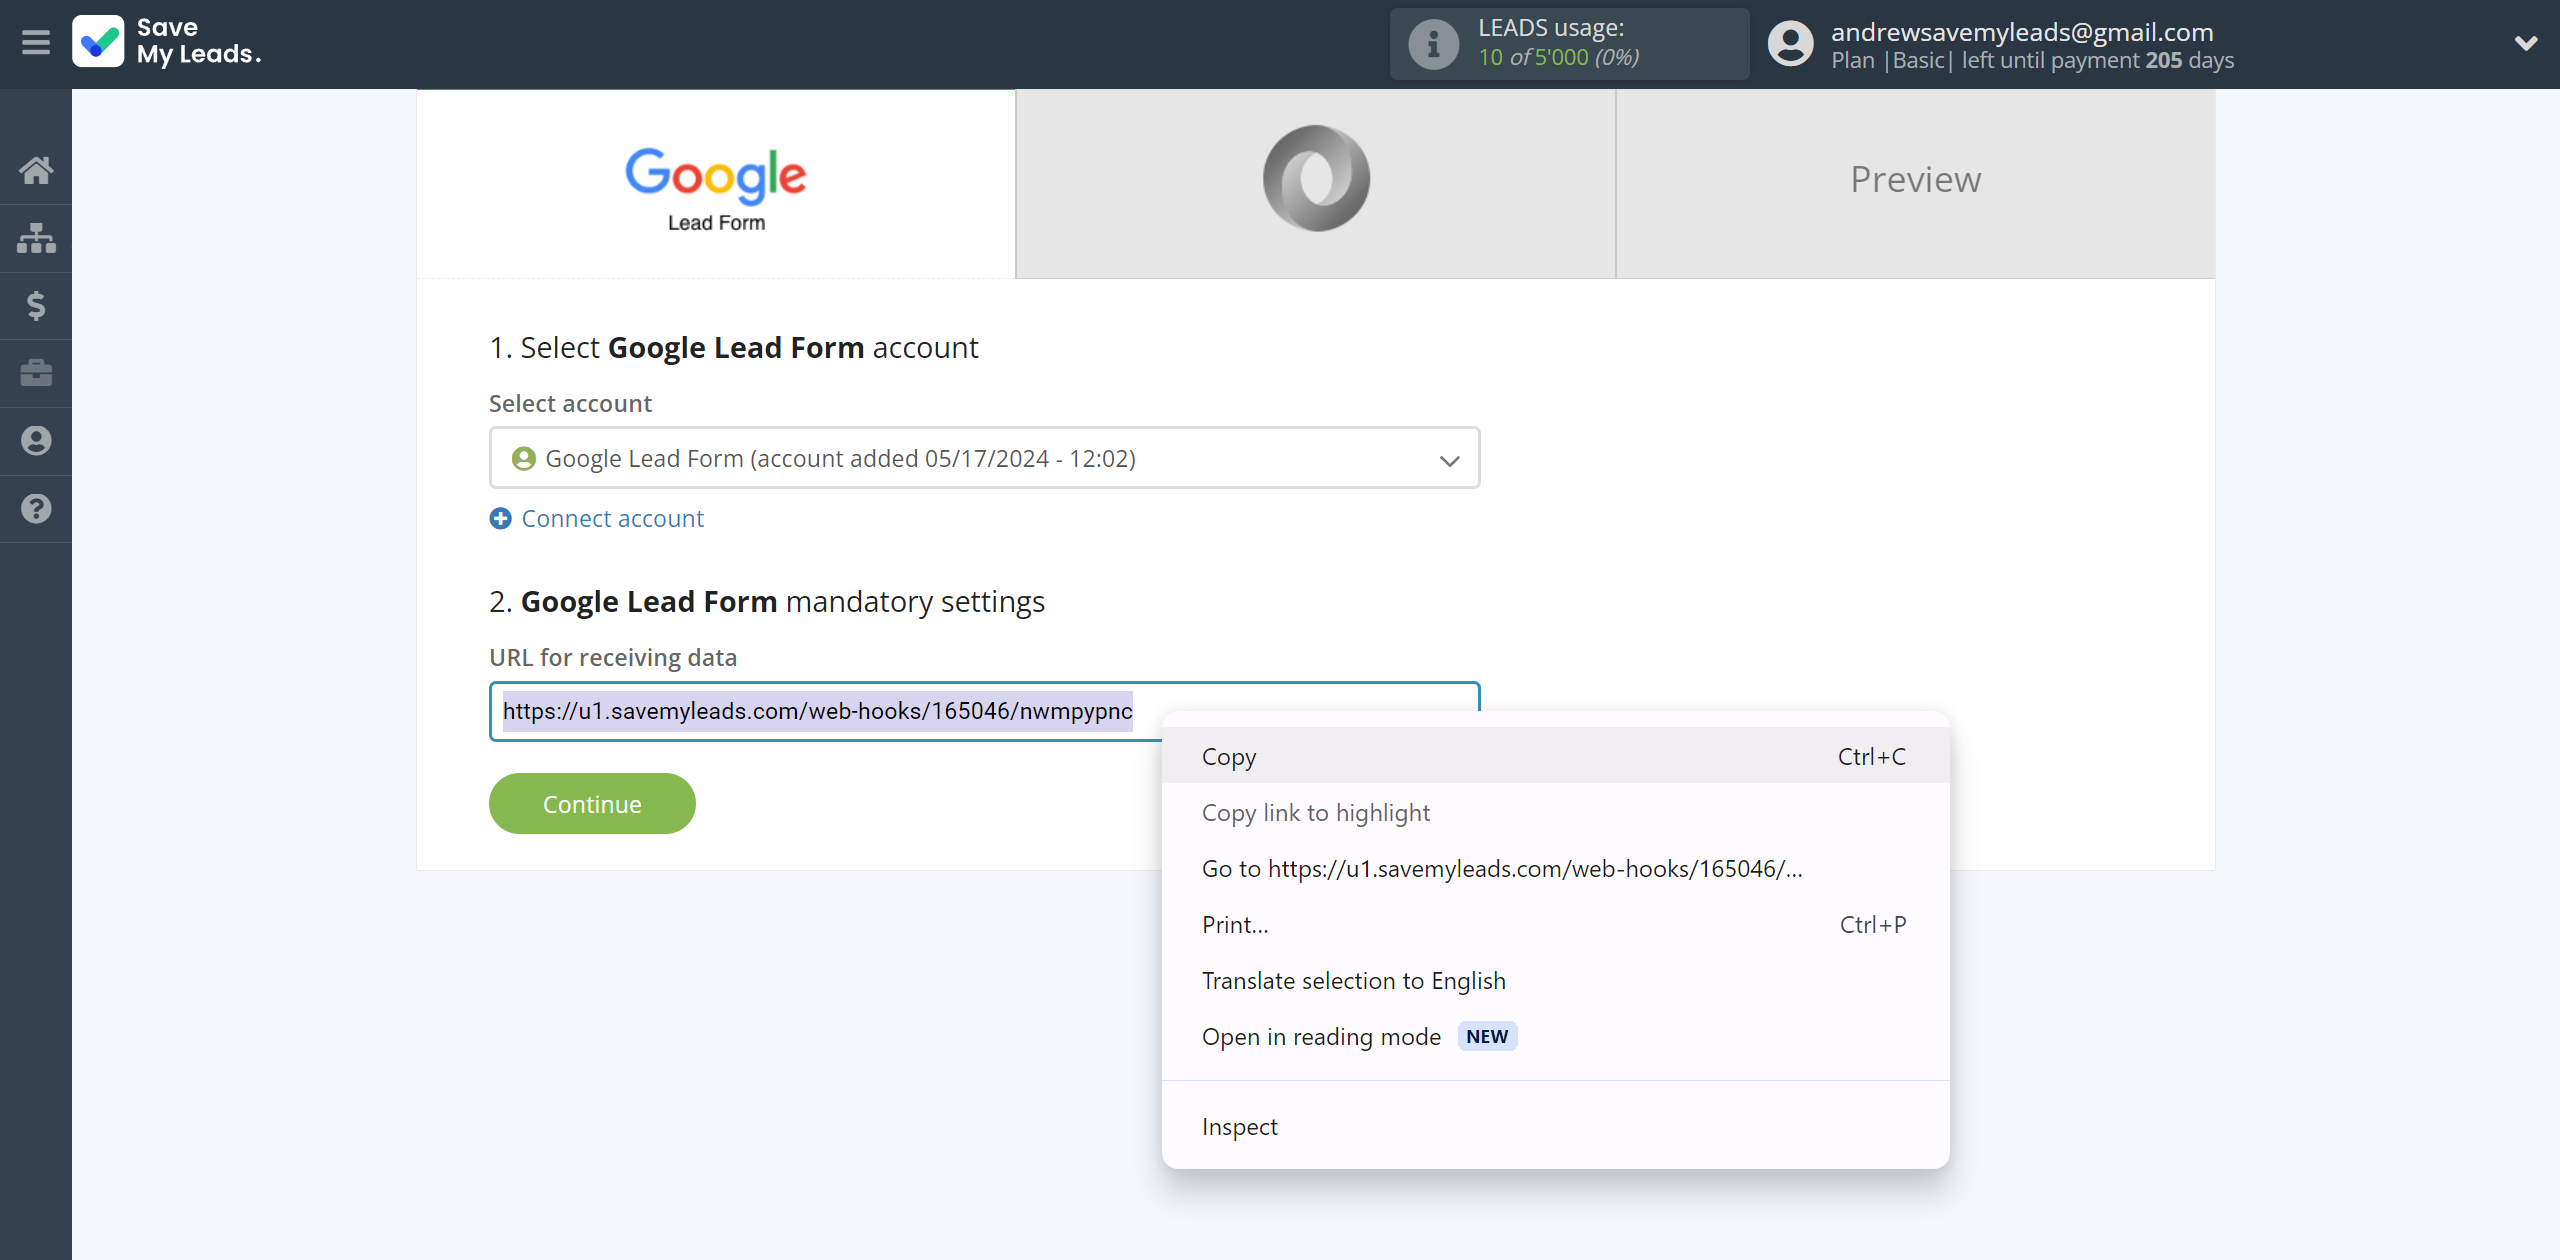 How to Connect Google Lead Form with JSON | Data Source account connection